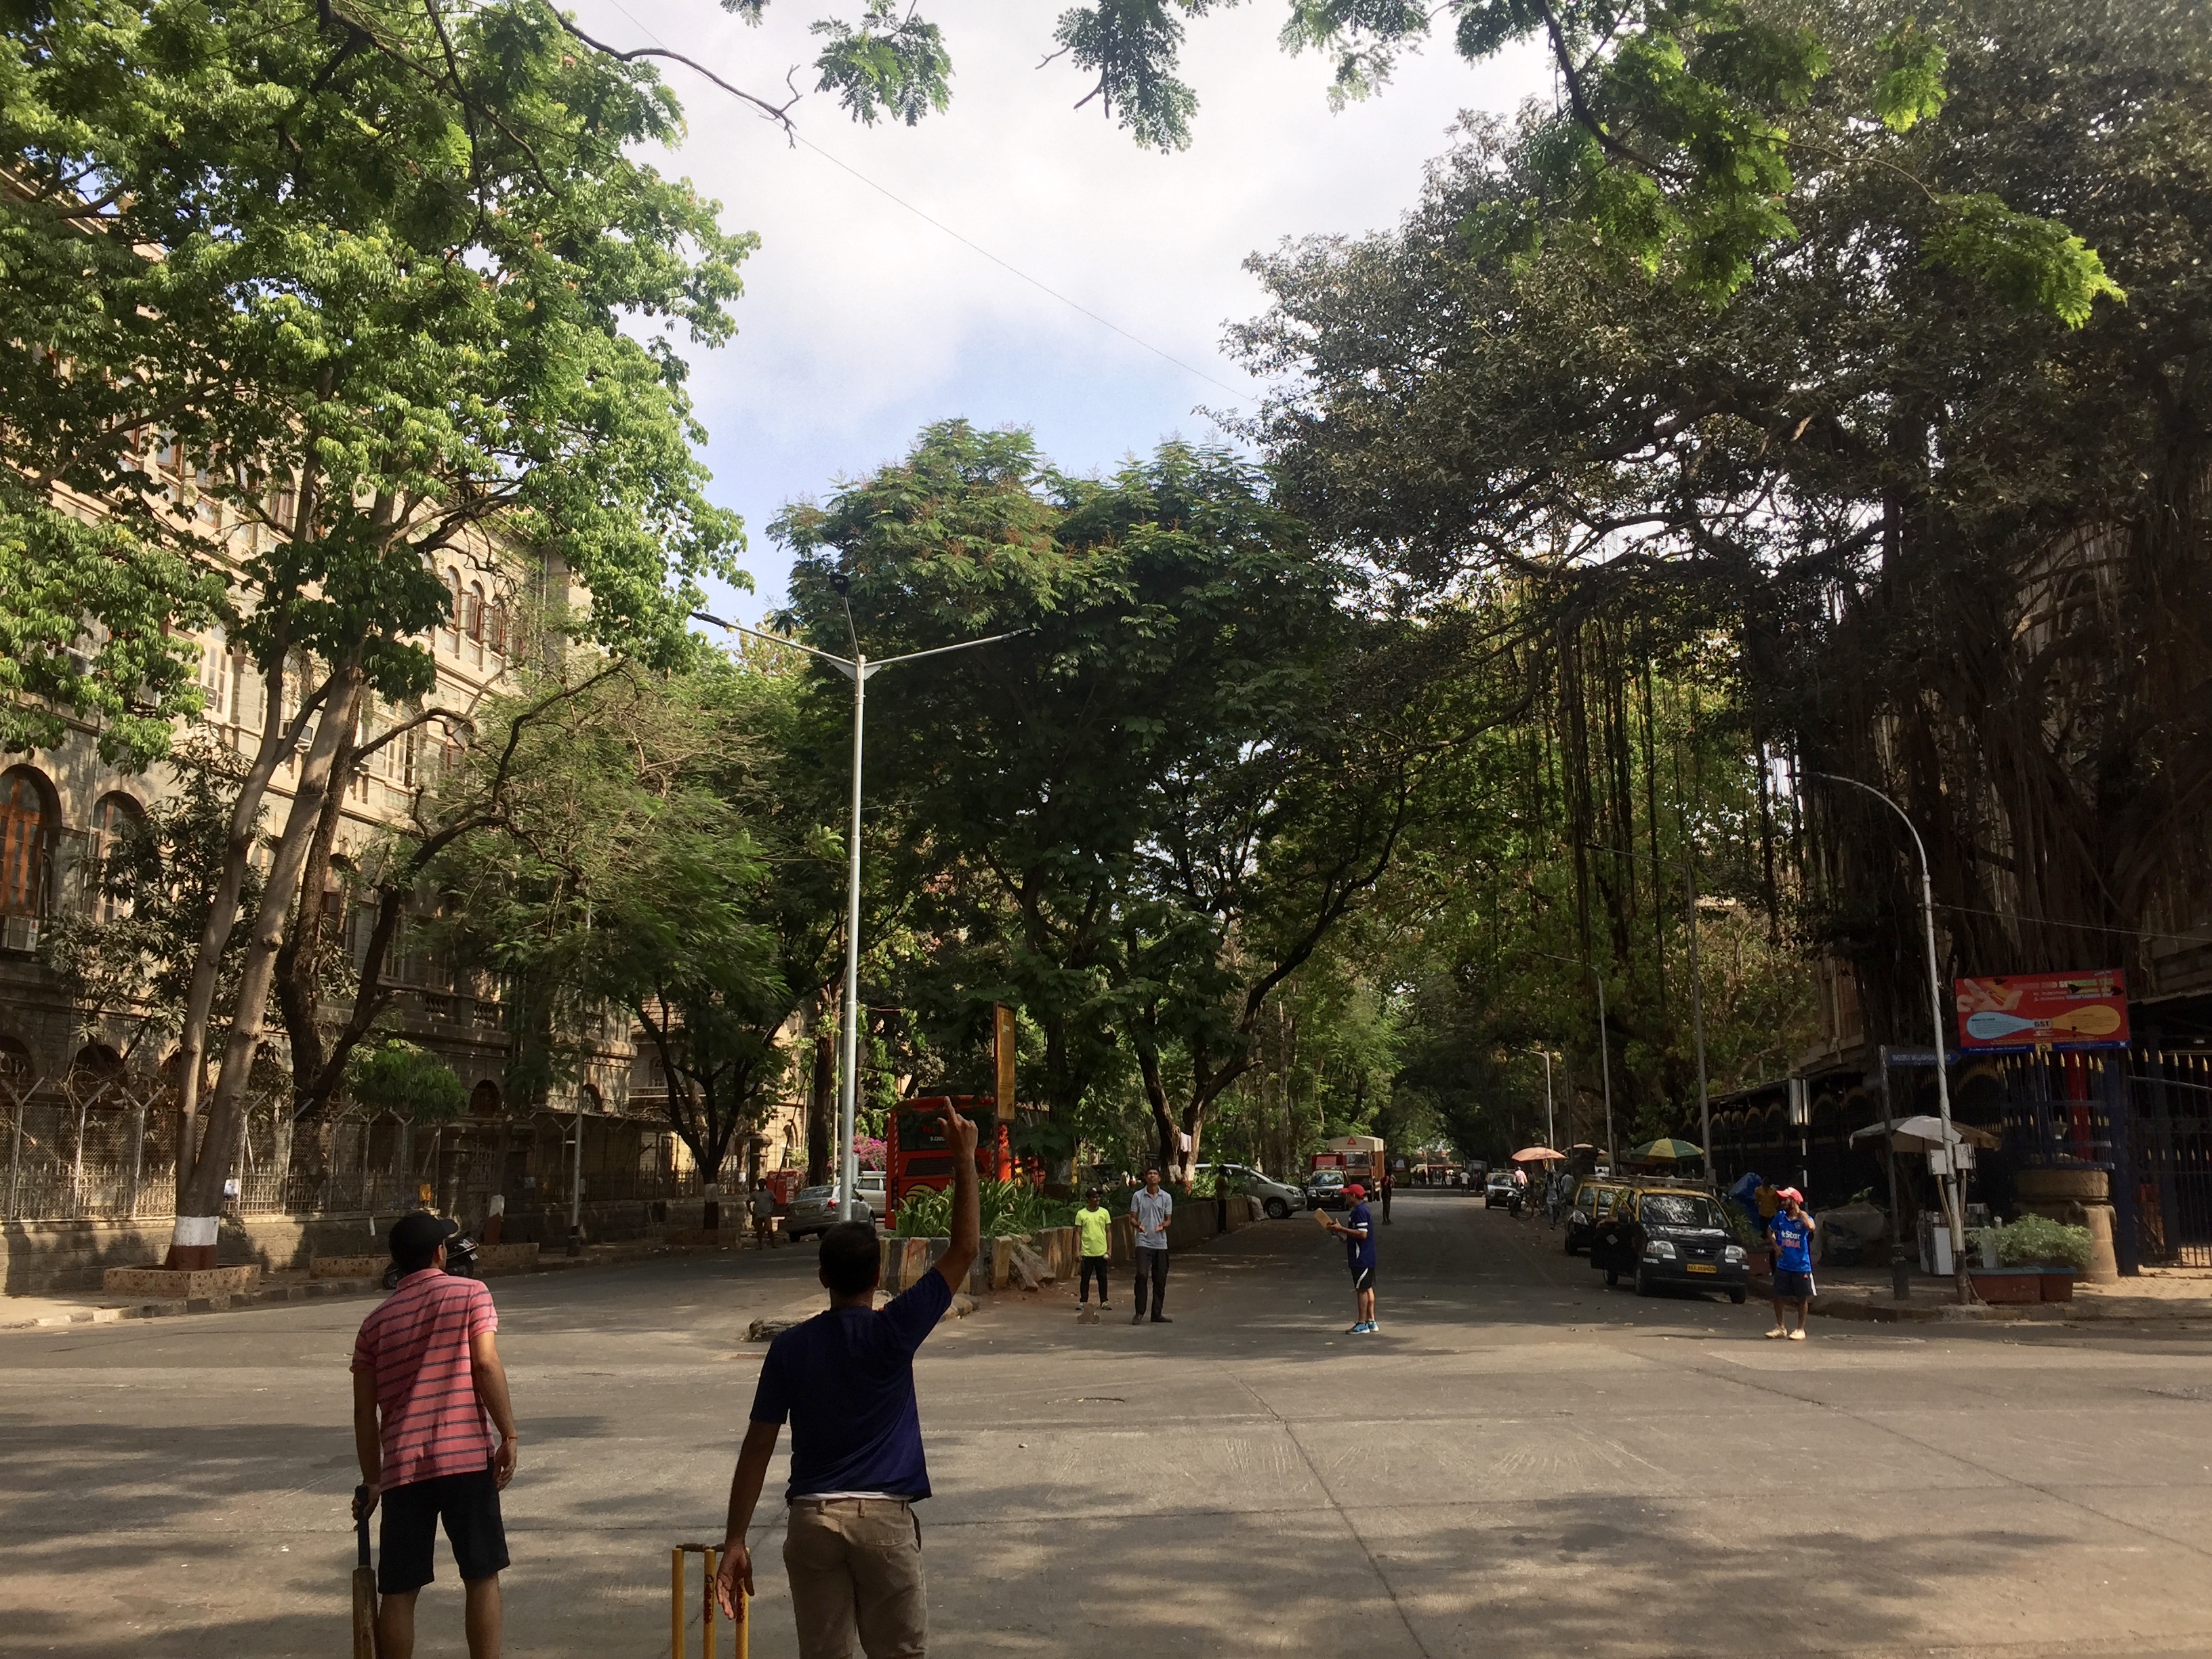 Cricket in the Streets in Mumbai